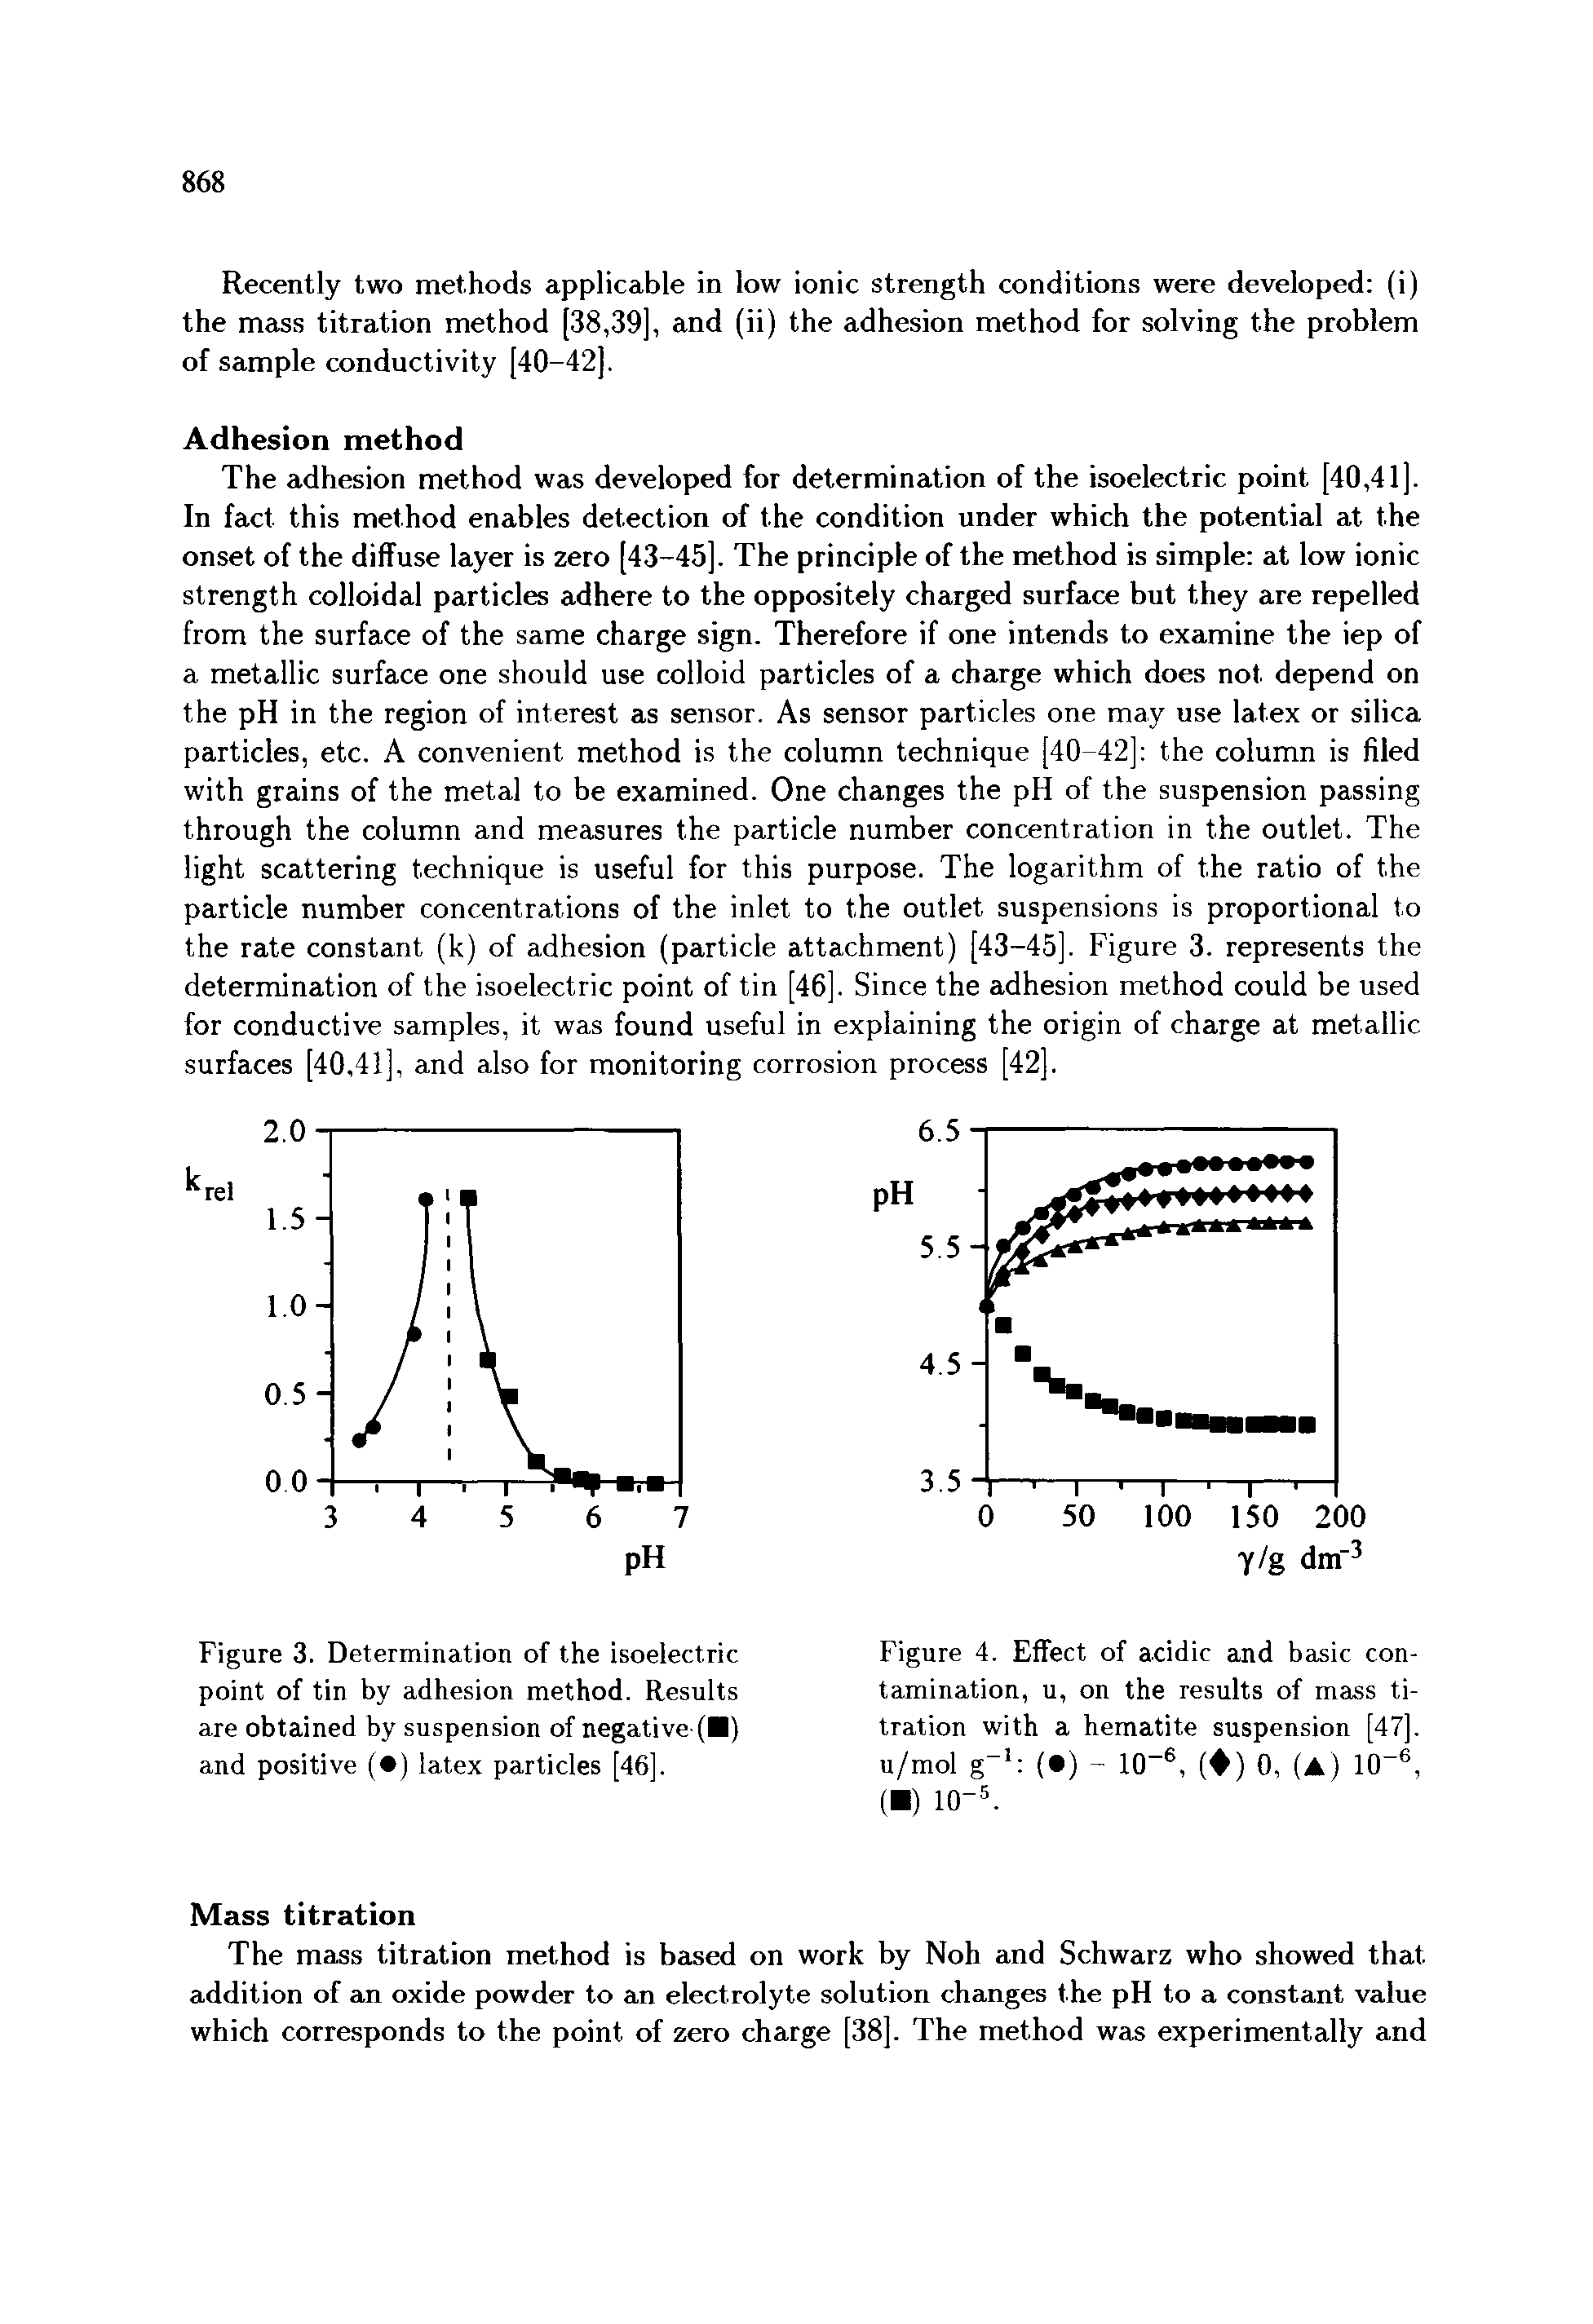 Figure 3. Determination of the isoelectric point of tin by adhesion method. Results are obtained by suspension of negative ( ) and positive ( ) latex particles [46].